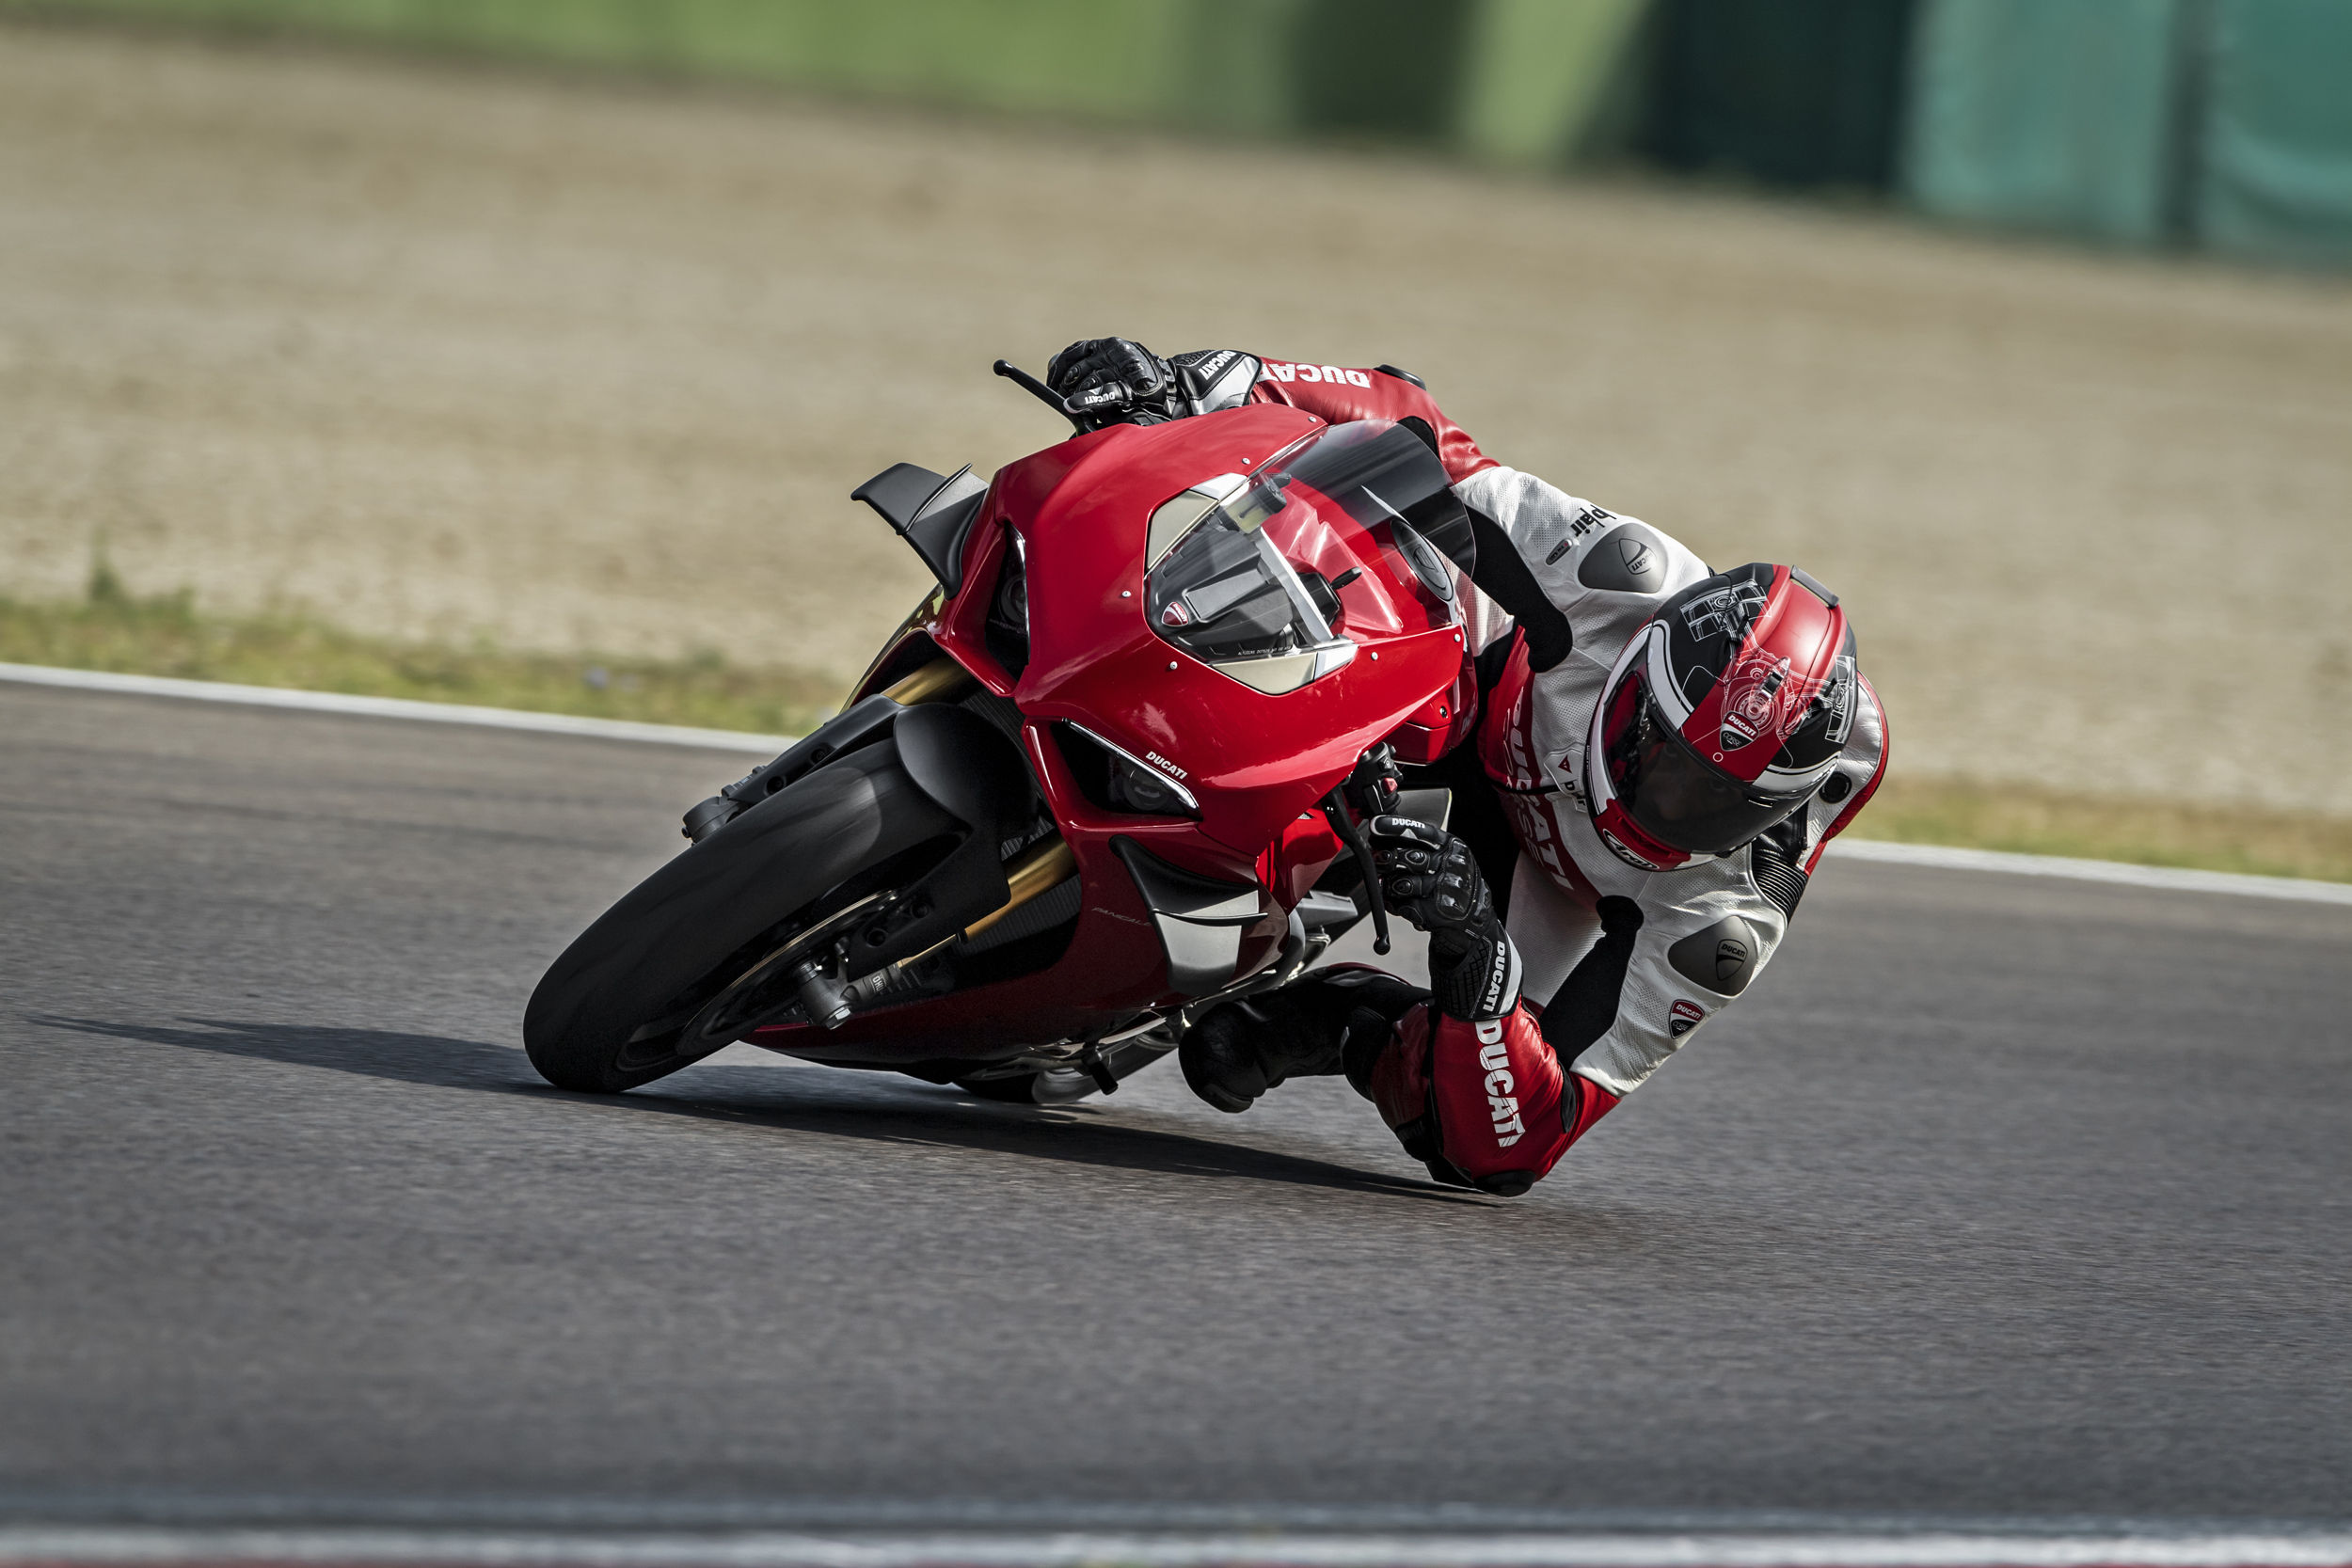 2020 Ducati Panigale V4 S - The Motorcycle Shows